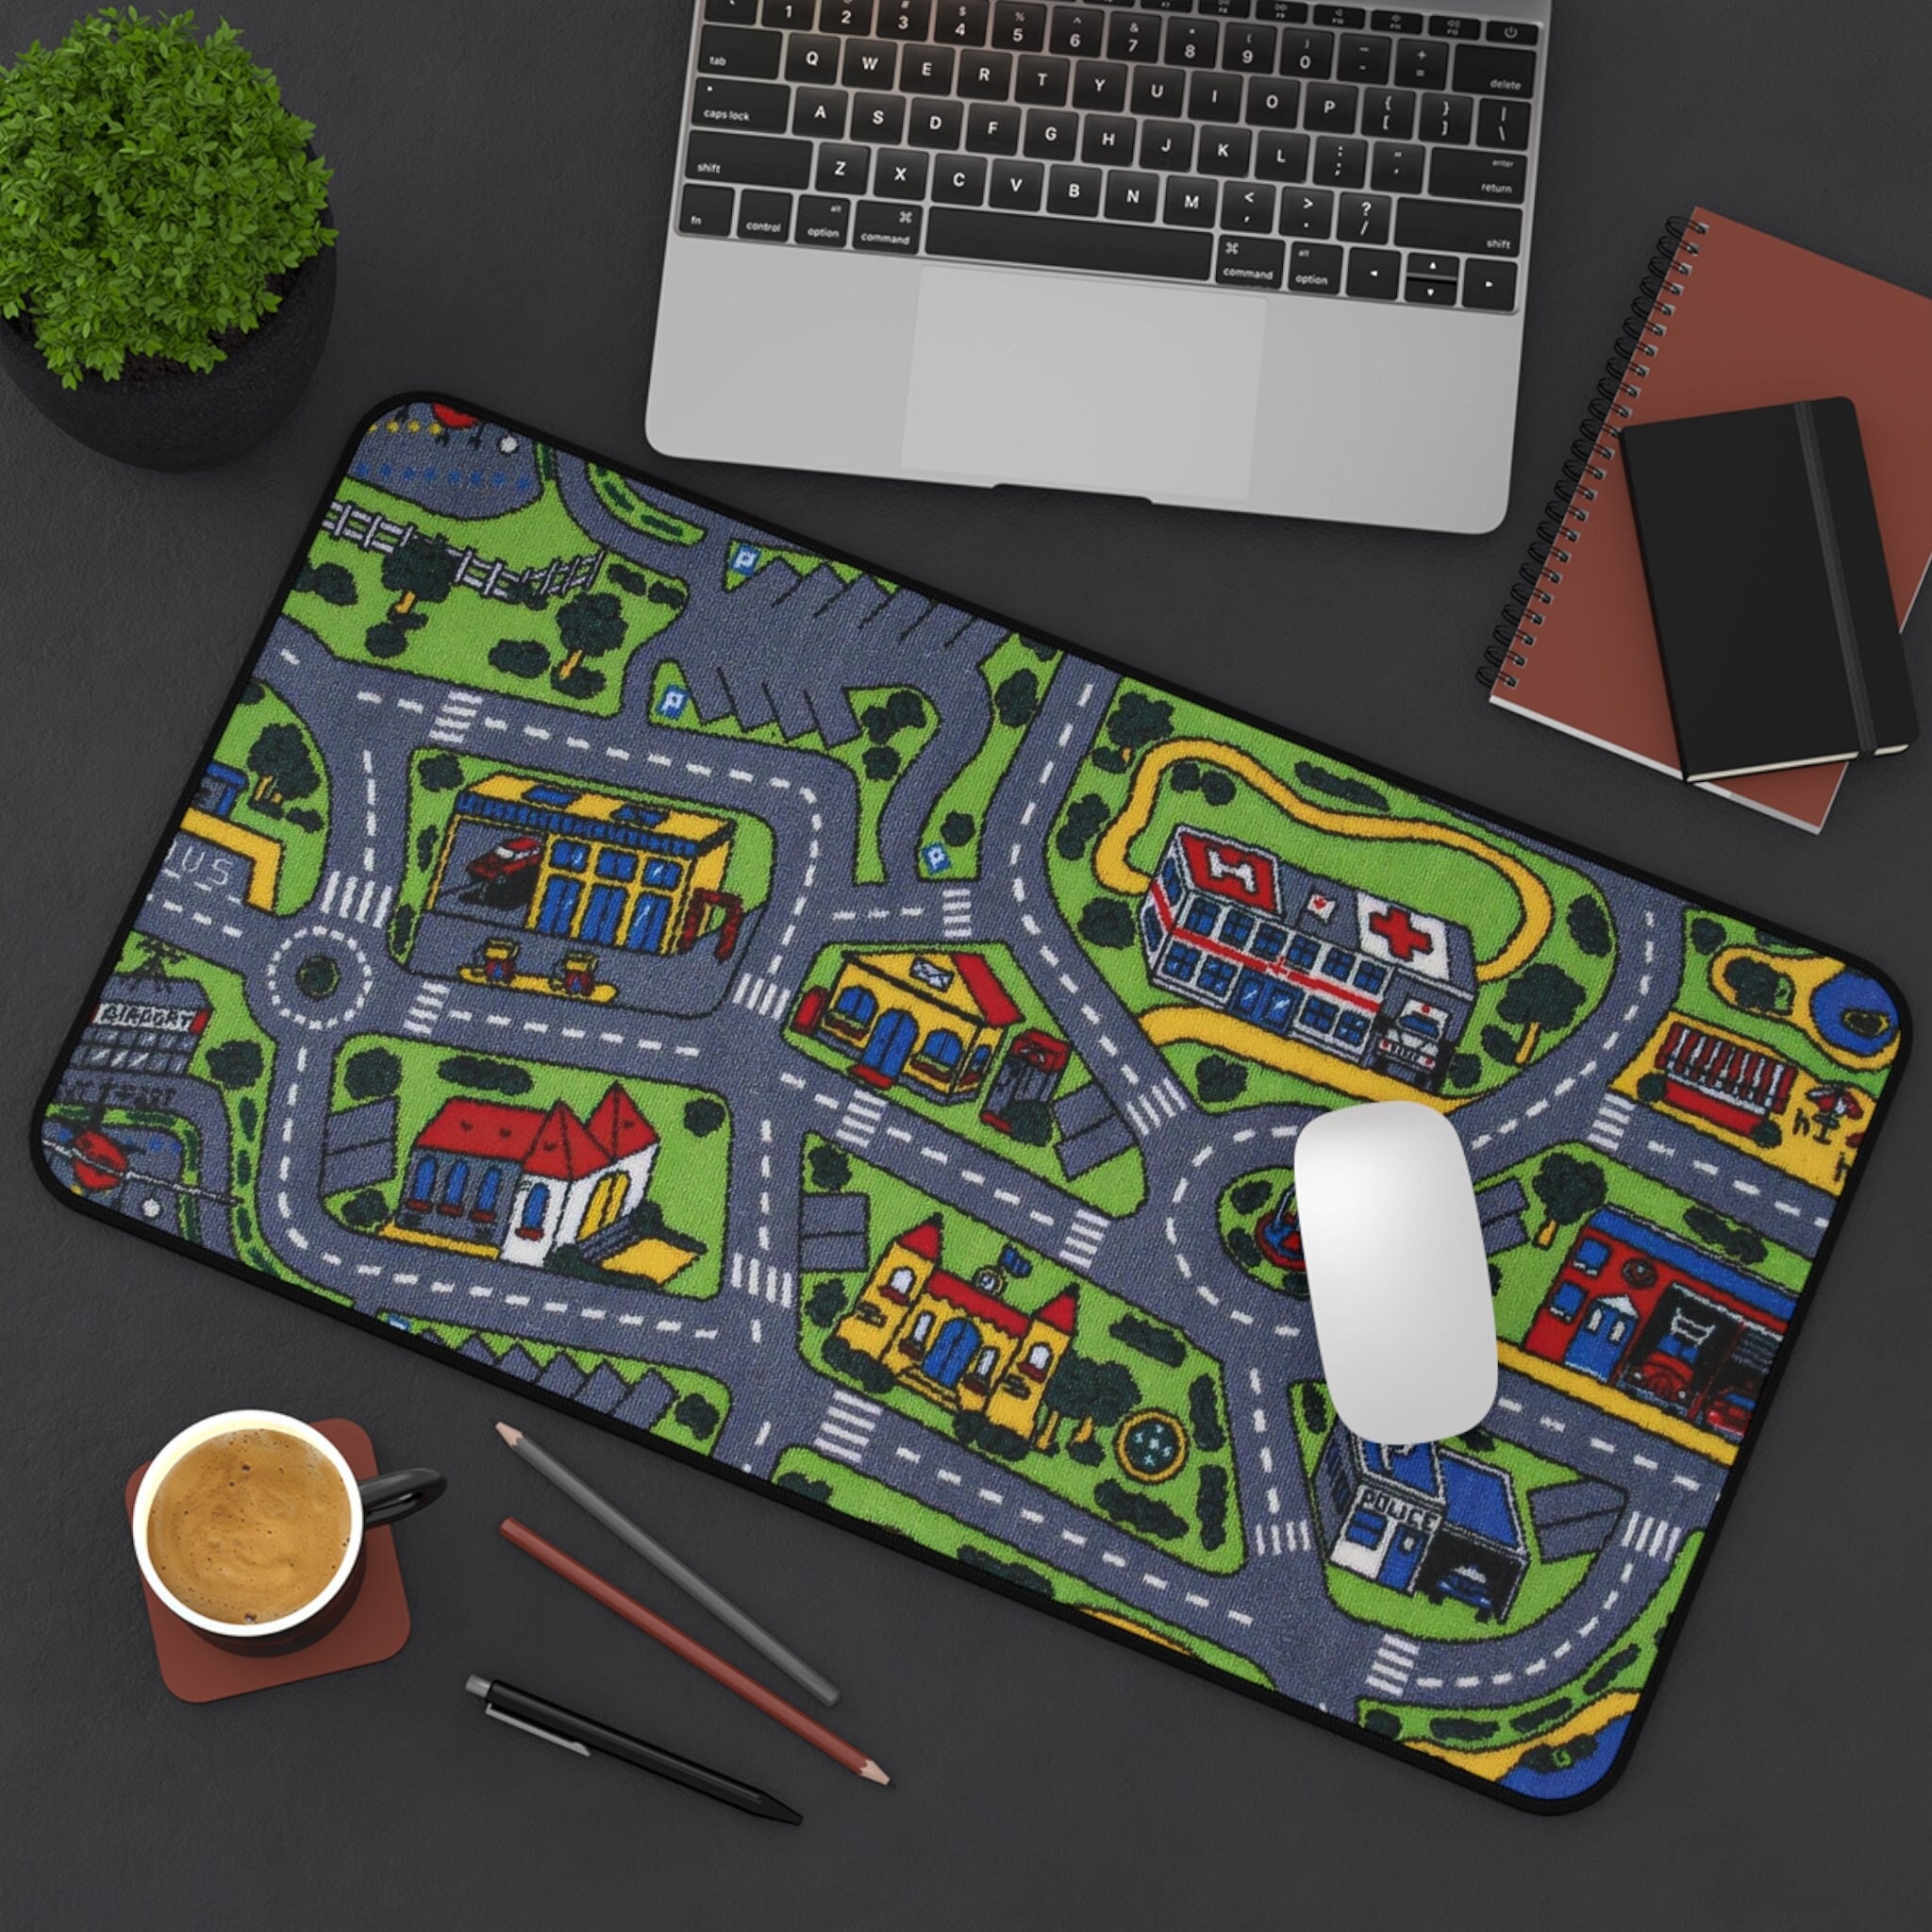 25+ Car-Themed Desk Accessories & Ideas for Your Home Office